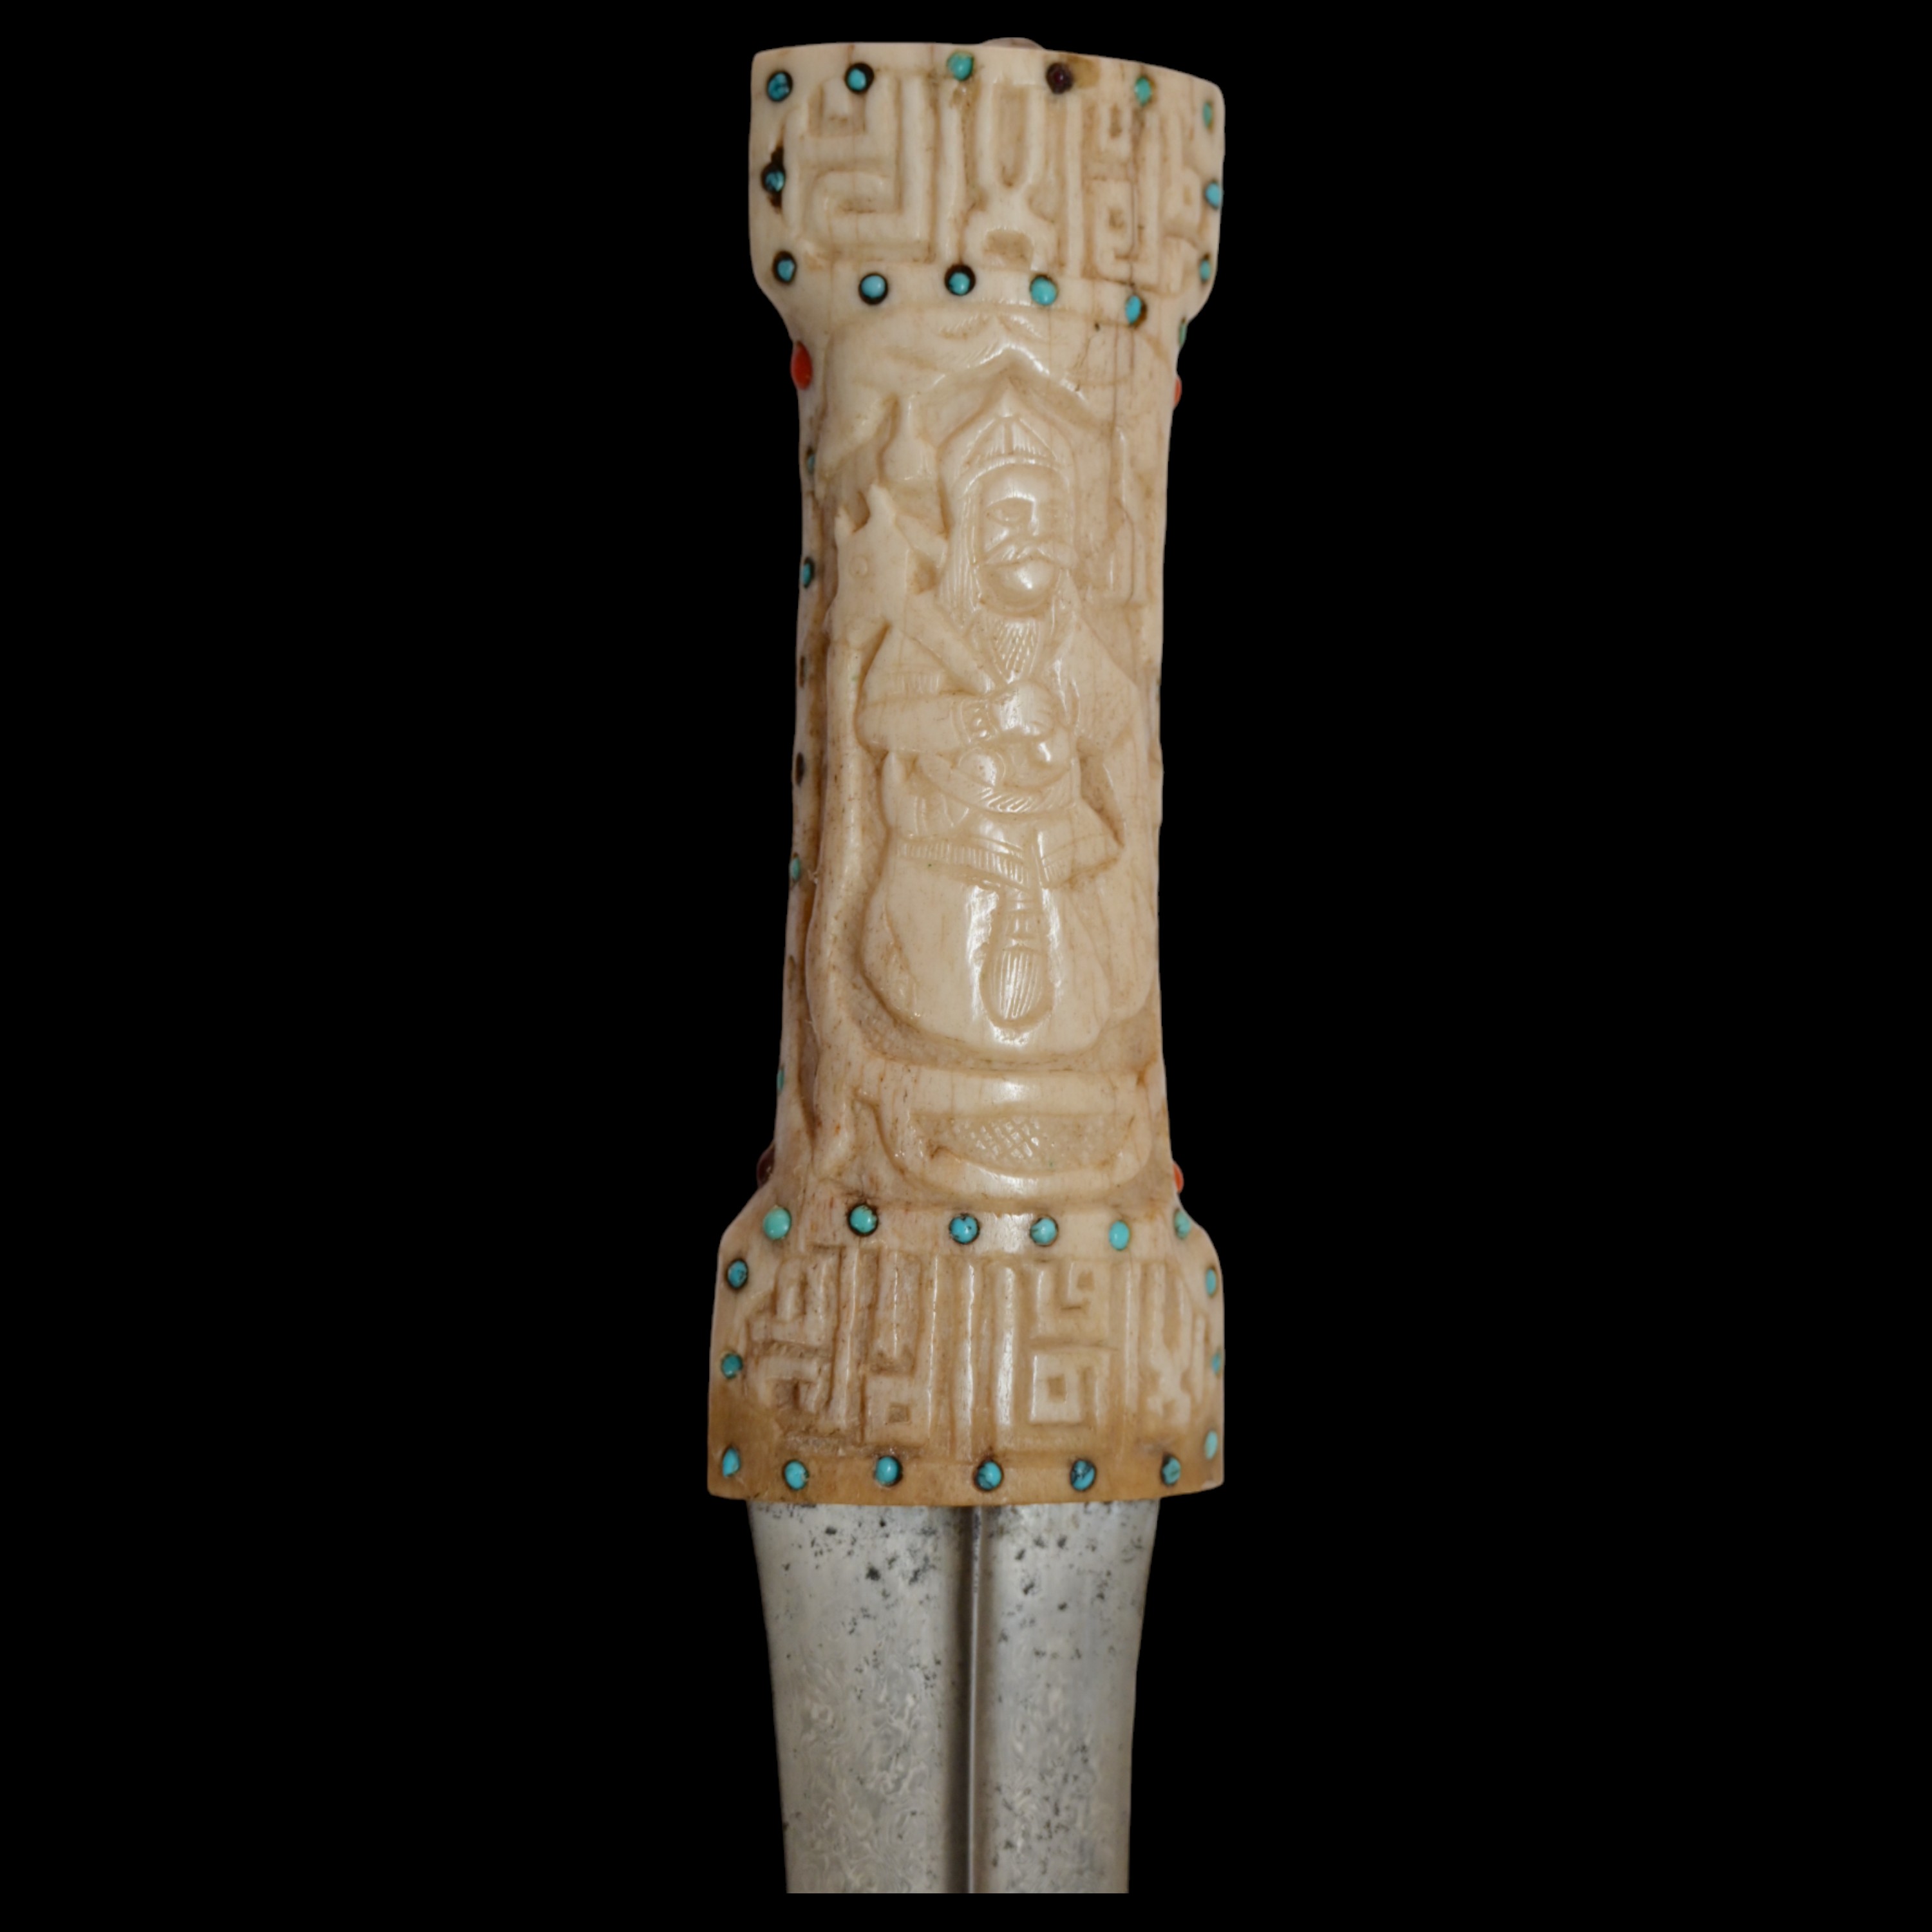 A magnificent Persian dagger with a wootz blade, turquoise, corals, carving, Qajar period, 19th _. - Image 8 of 8